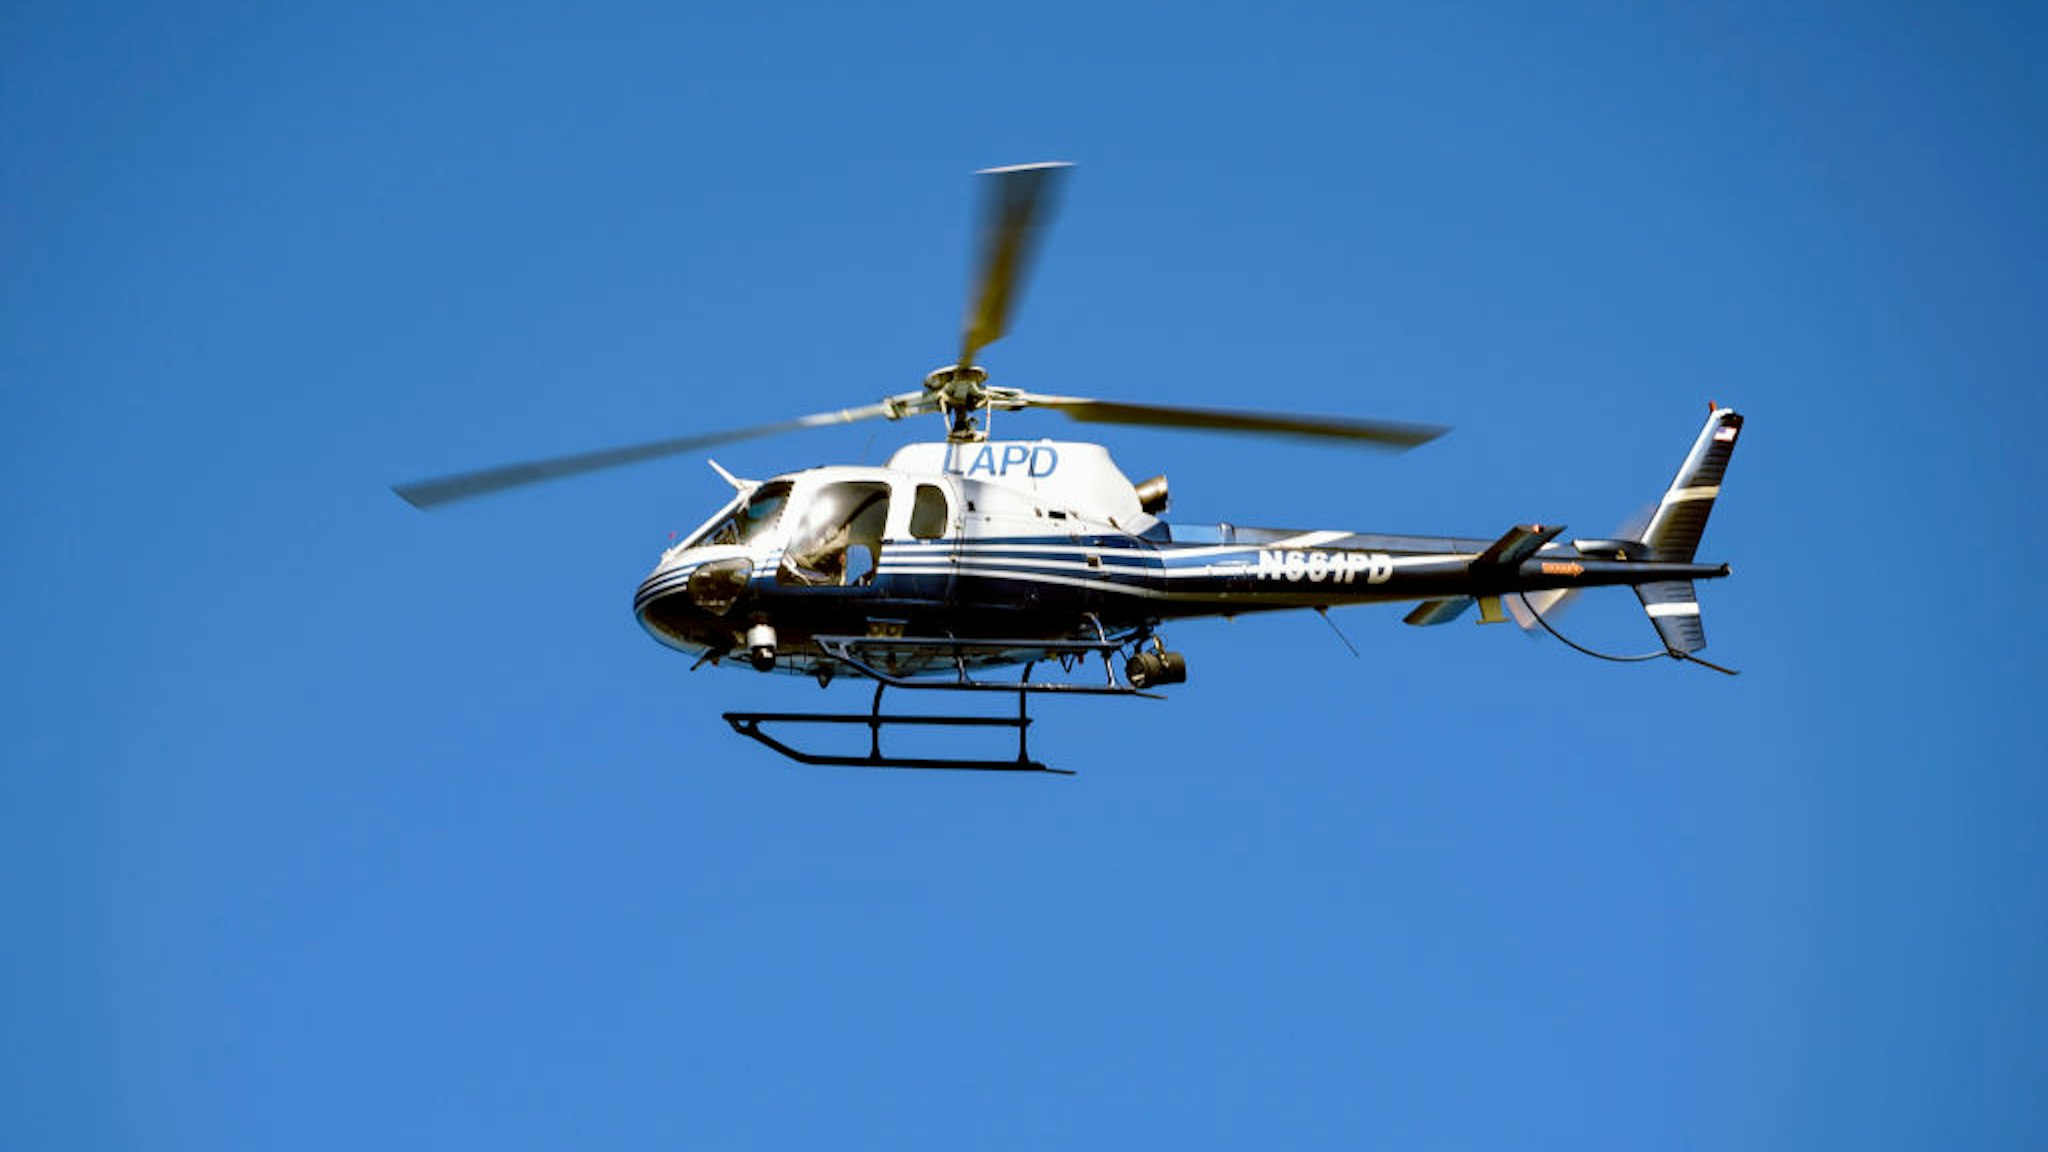 A Los Angeles Police Department helicopter seen flying over the LAPD Academy during a ceremony in honor of the 150th Anniversary of the LAPD in Los Angeles, California.